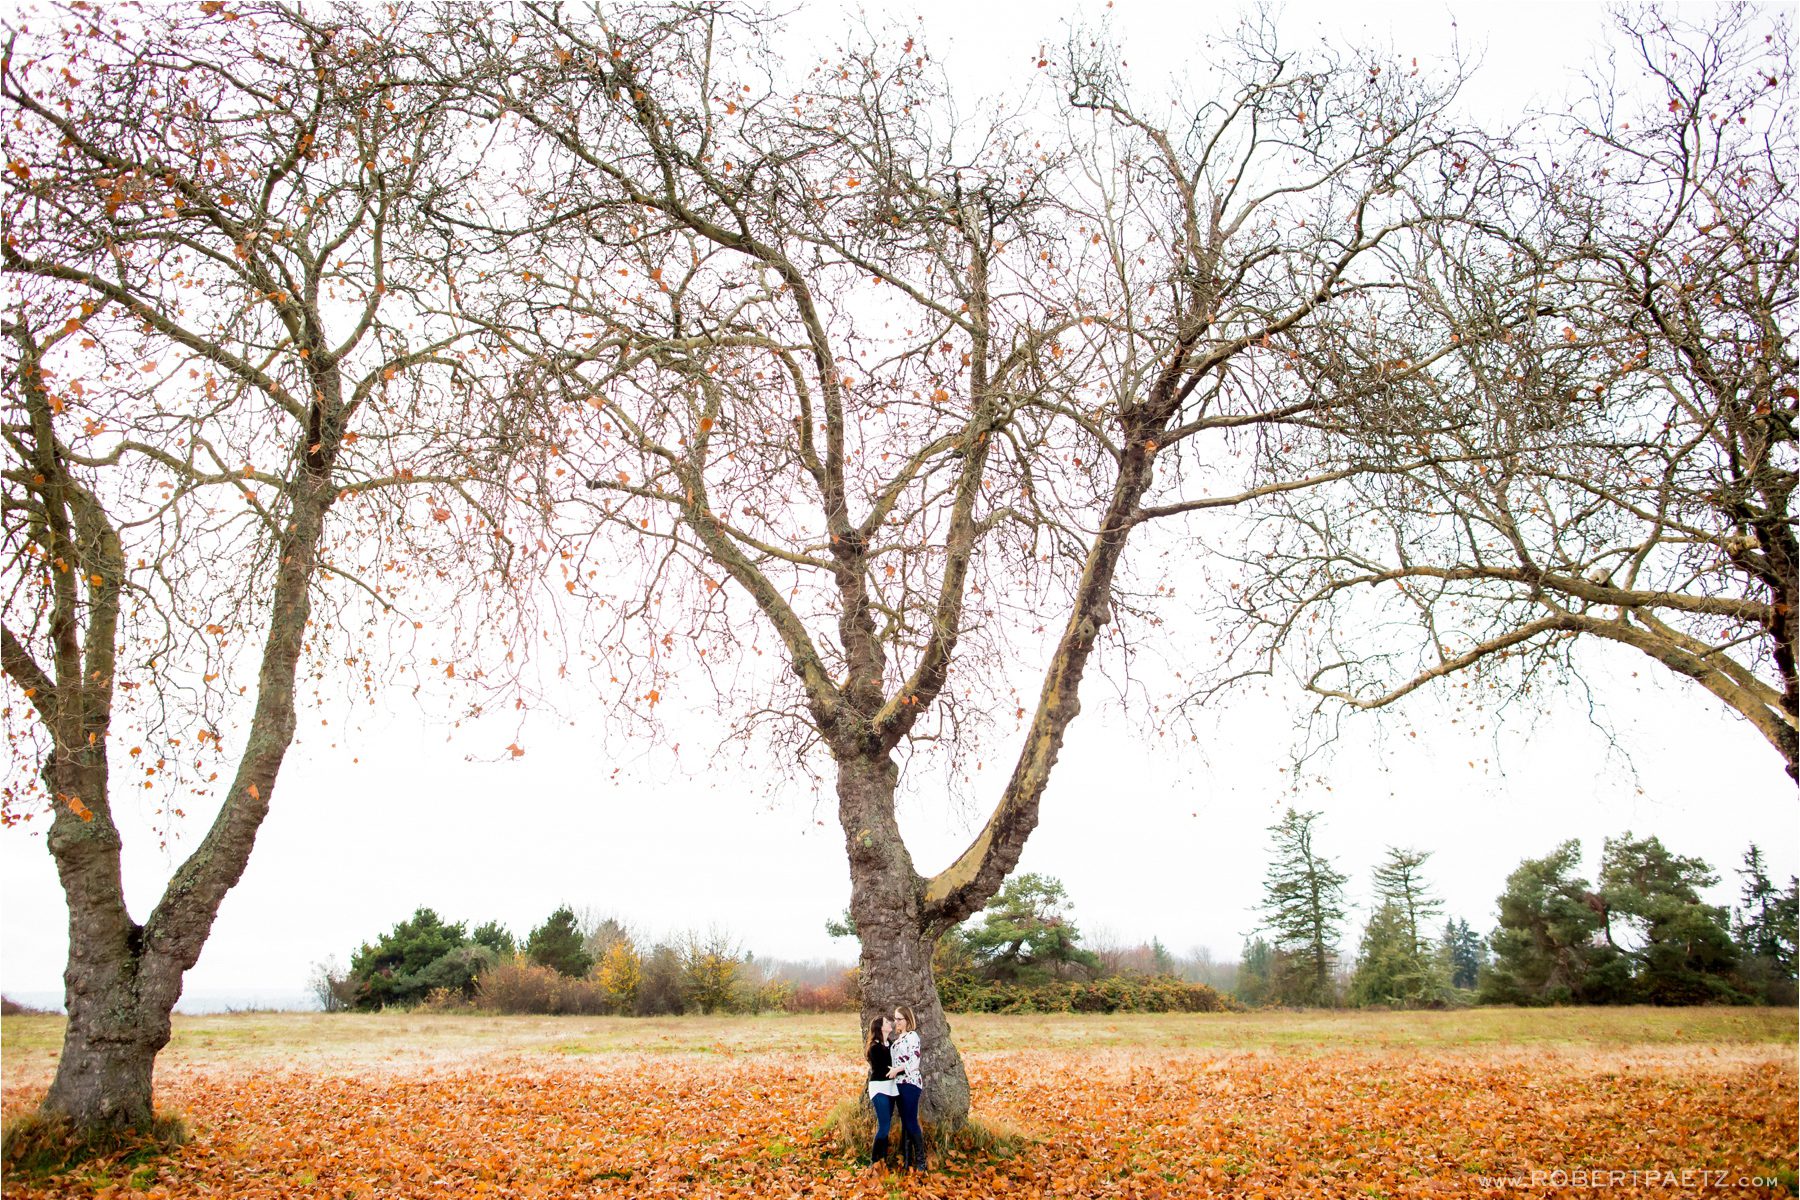 A fall engagement photography session amongst the orange and yellow leaves of Discovery Park in Seattle, photographed by the destination wedding photographer, Robert Paetz. 